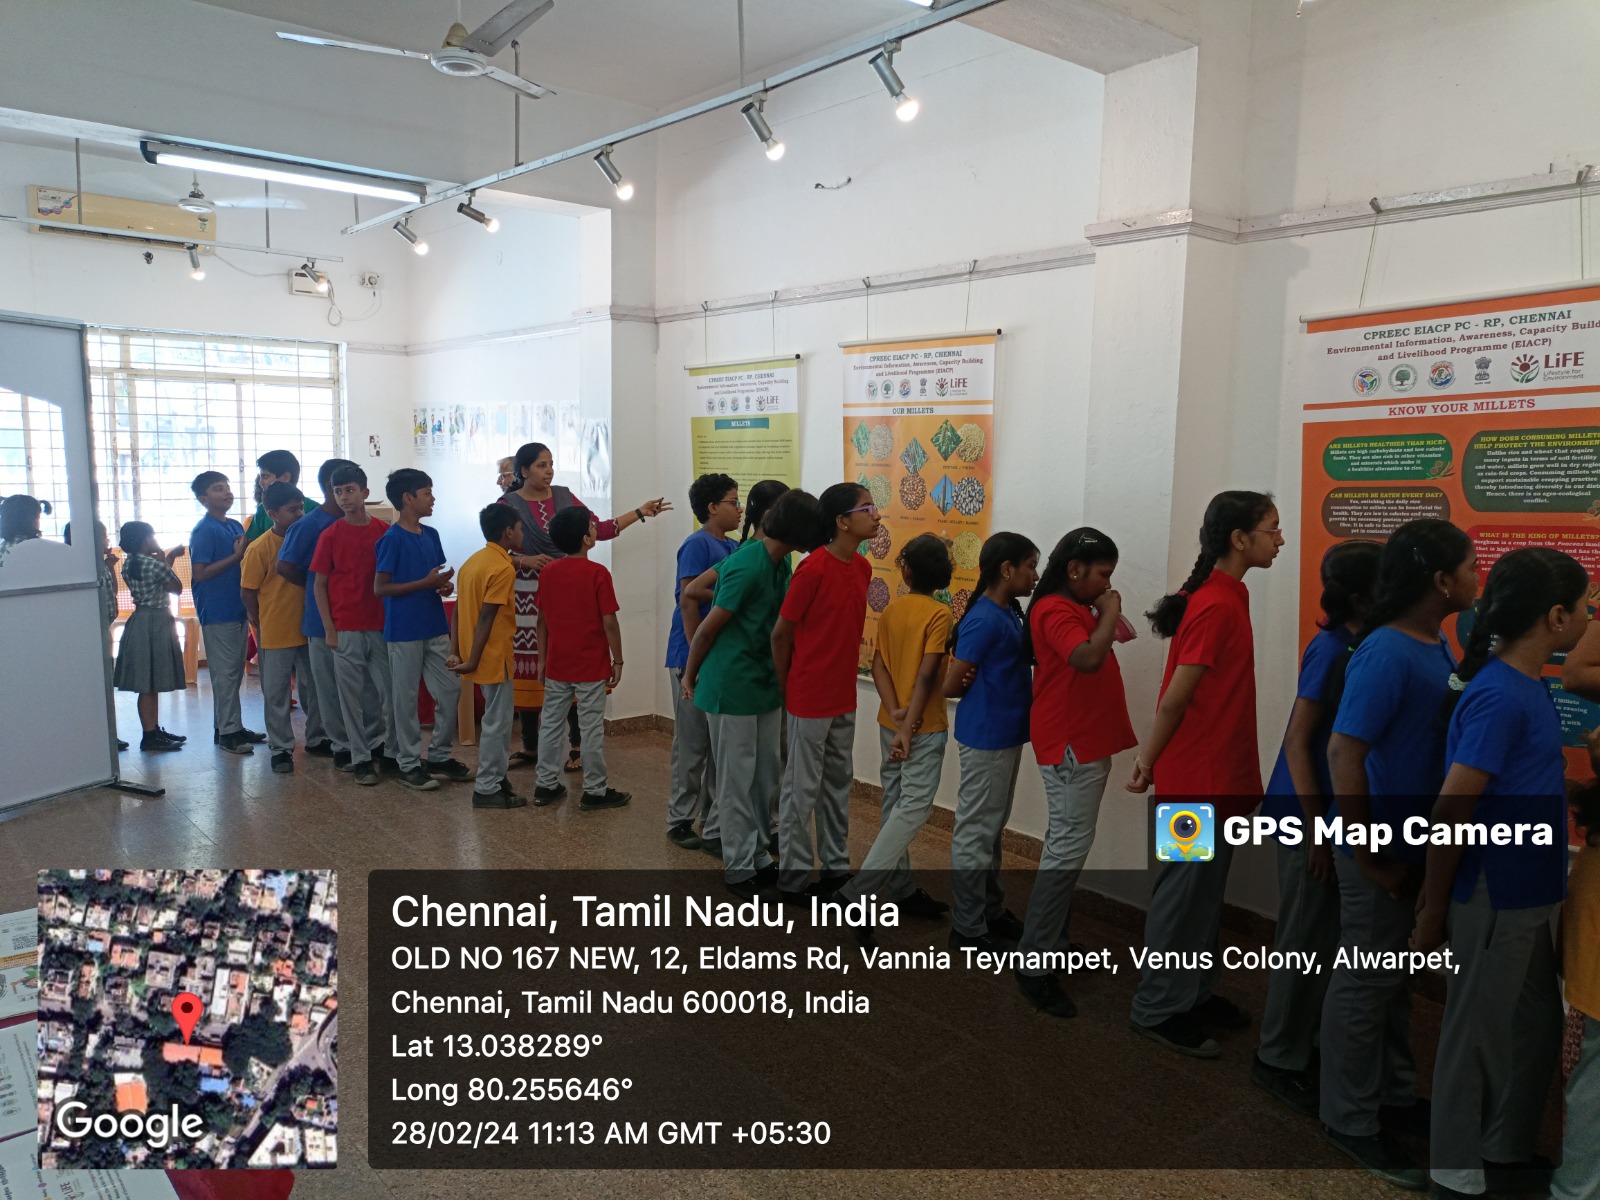 CPREEC EIACP PC RP-Chennai, Millet Exhibition, Day 1. Students visiting exhibition